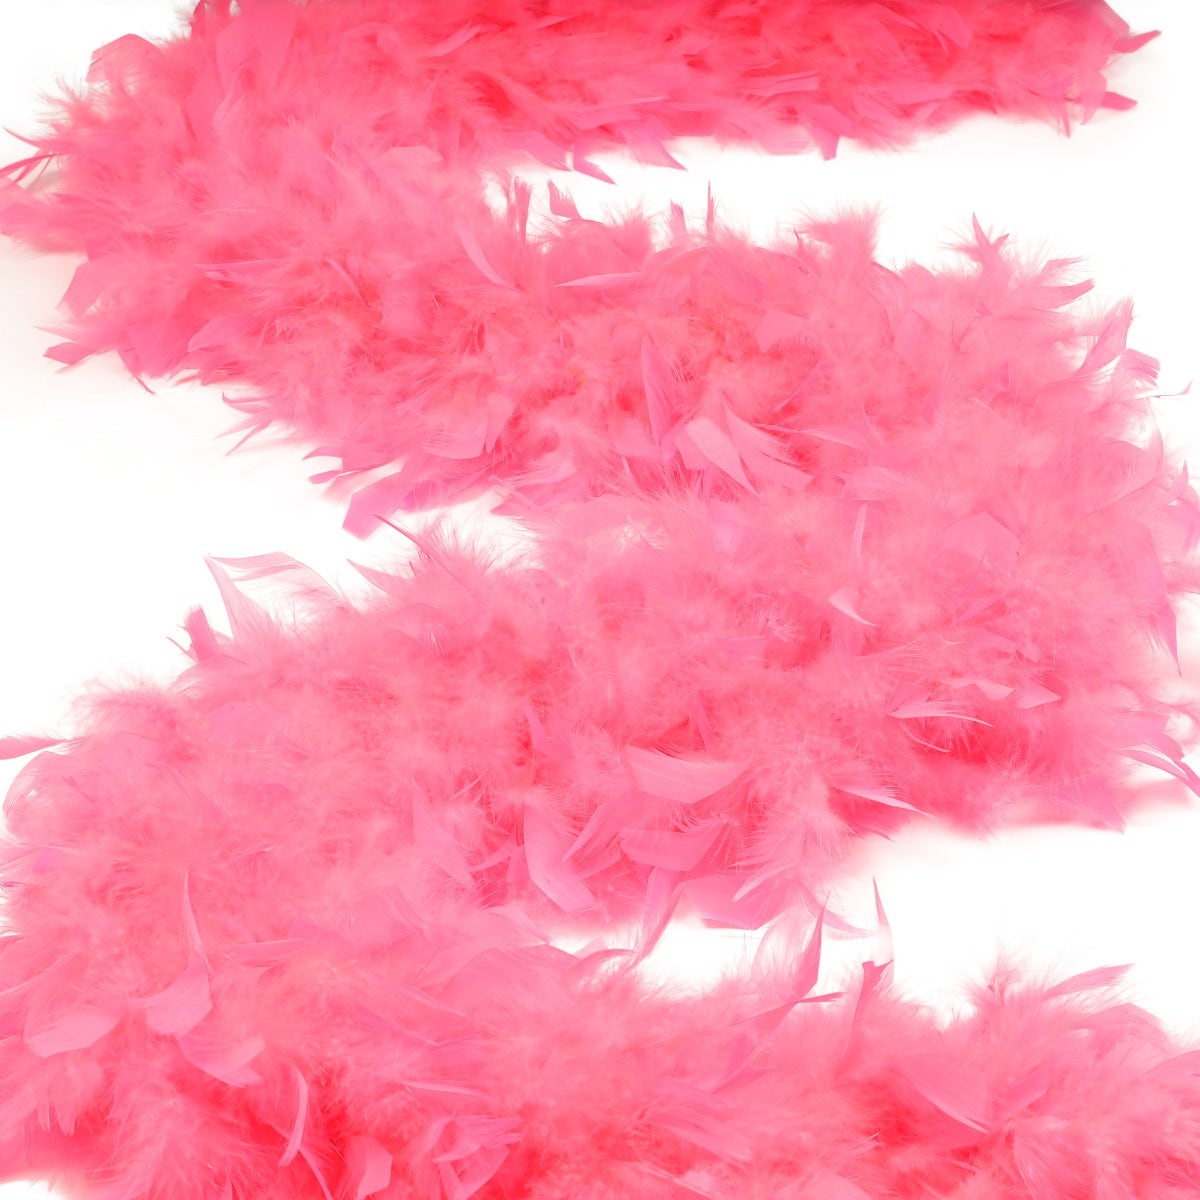 Ostrich Feathers 9-12 Drabs - Shocking Pink